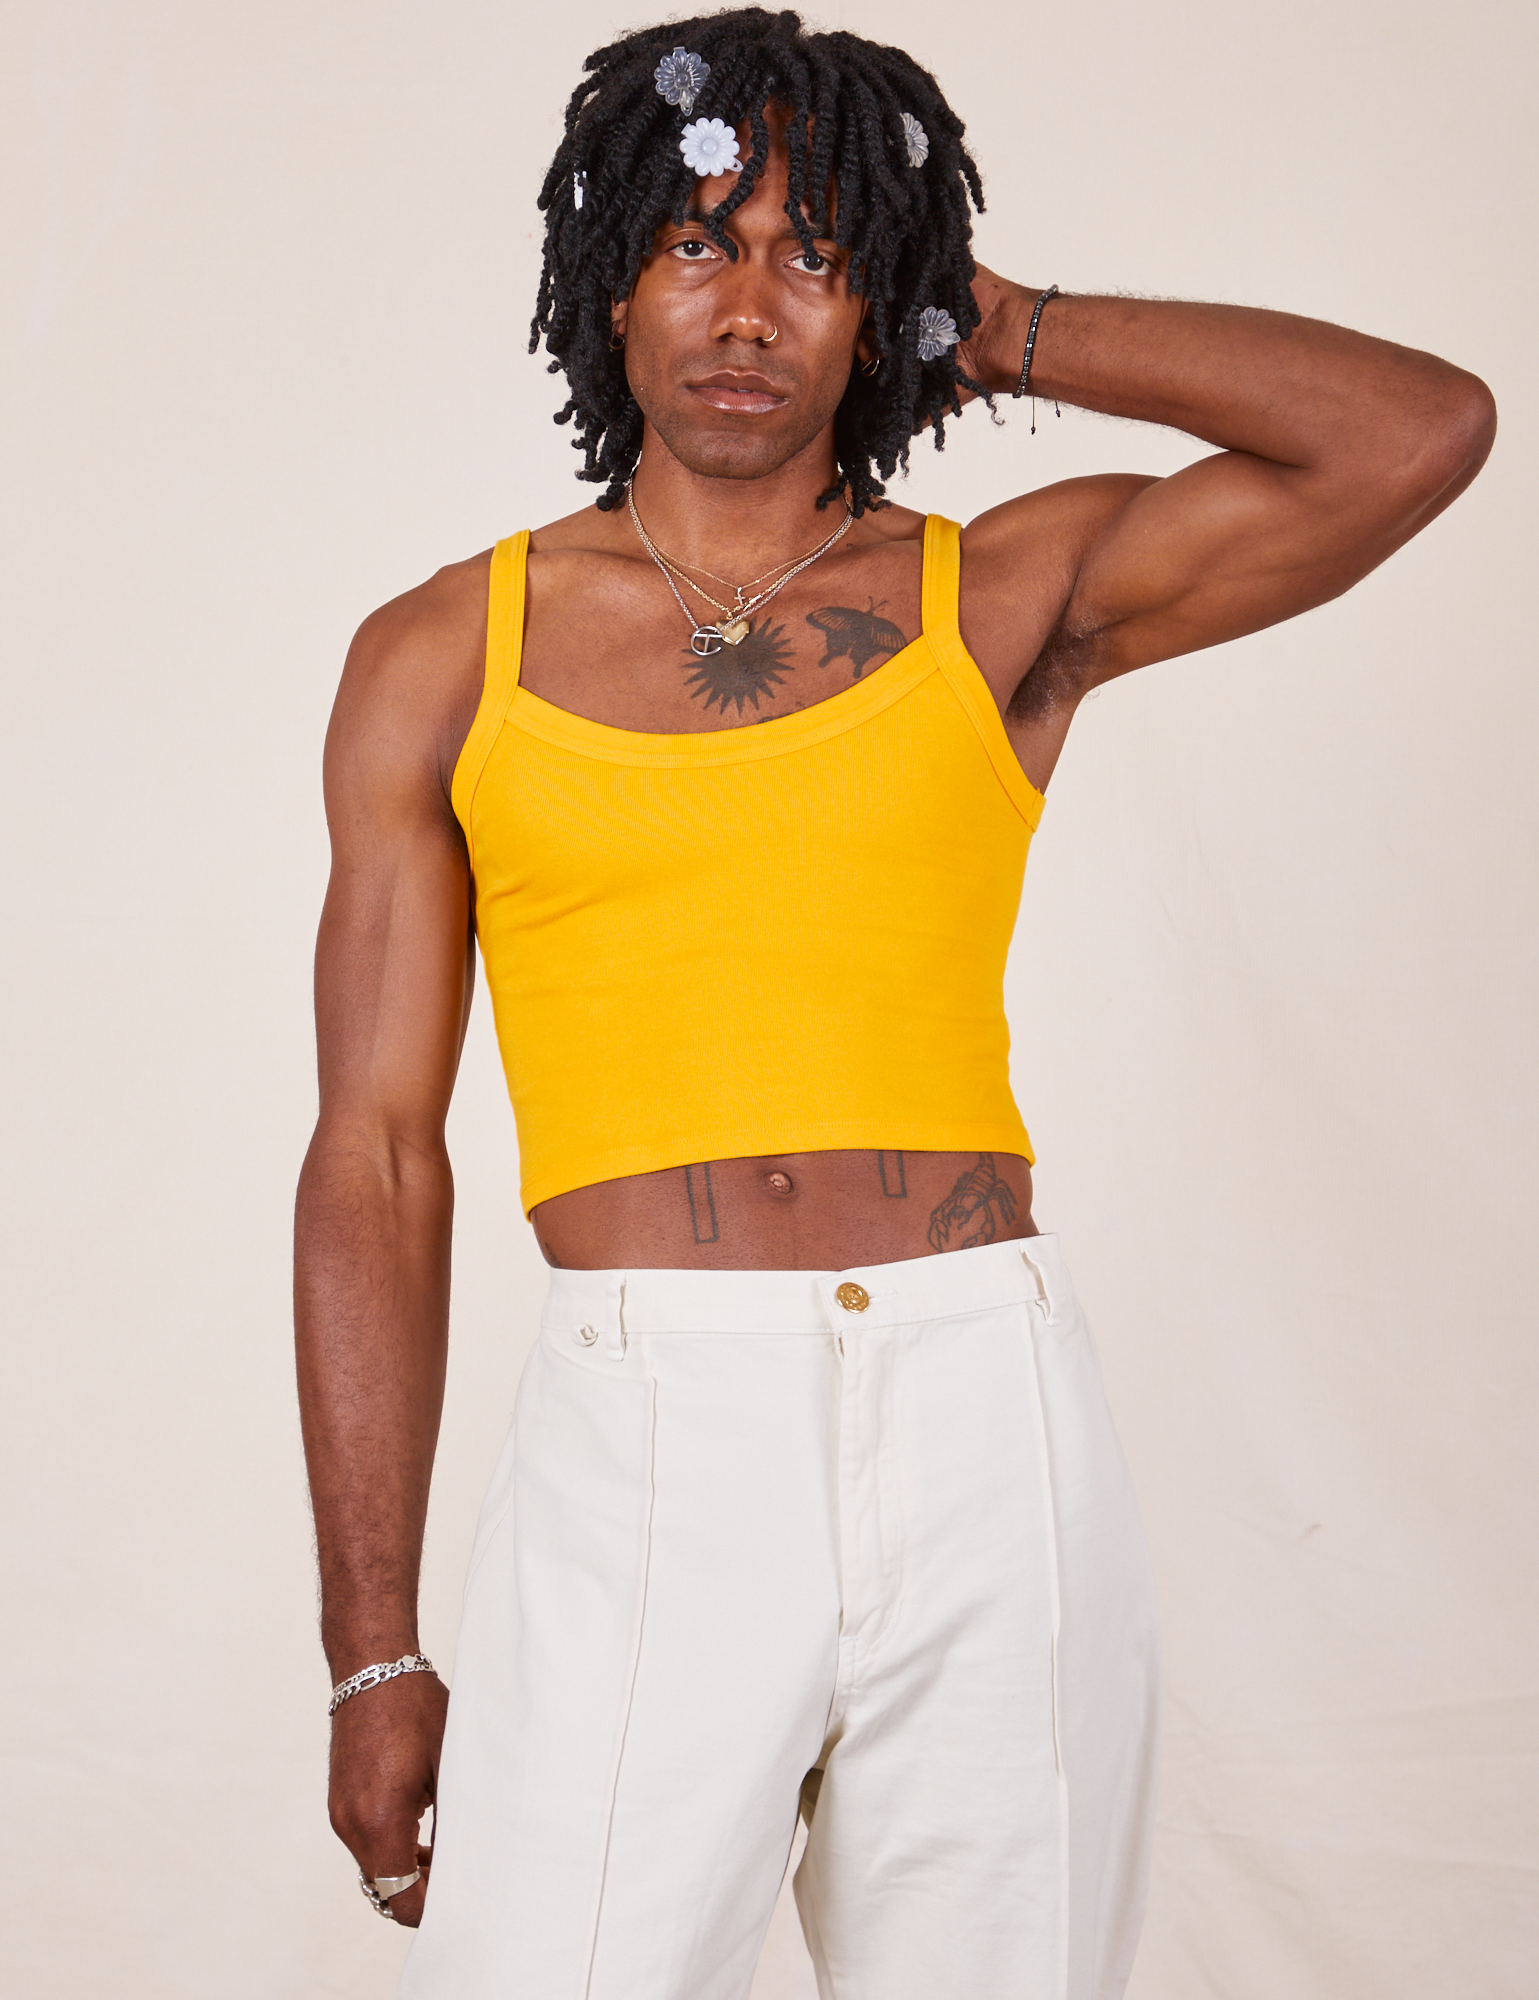 Jerrod is 6&#39;3&quot; and wearing S Cropped Cami in Sunshine Yellow paired with vintage tee off-white Western Pants